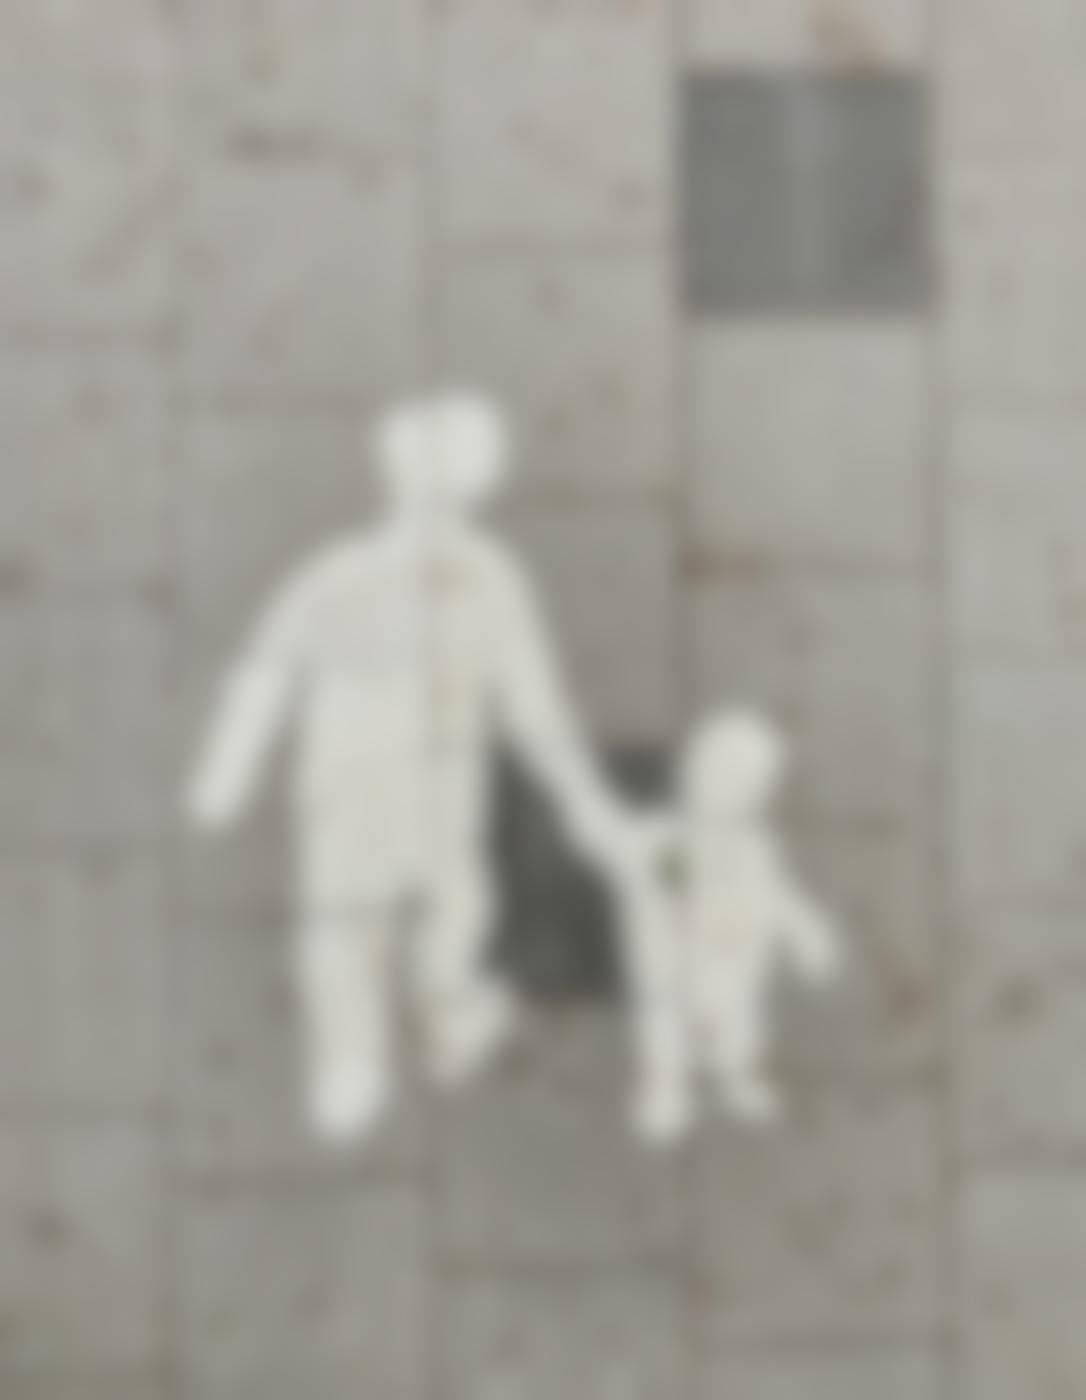 A painting in the sidewalk, outline of an adult holding  a child's hand